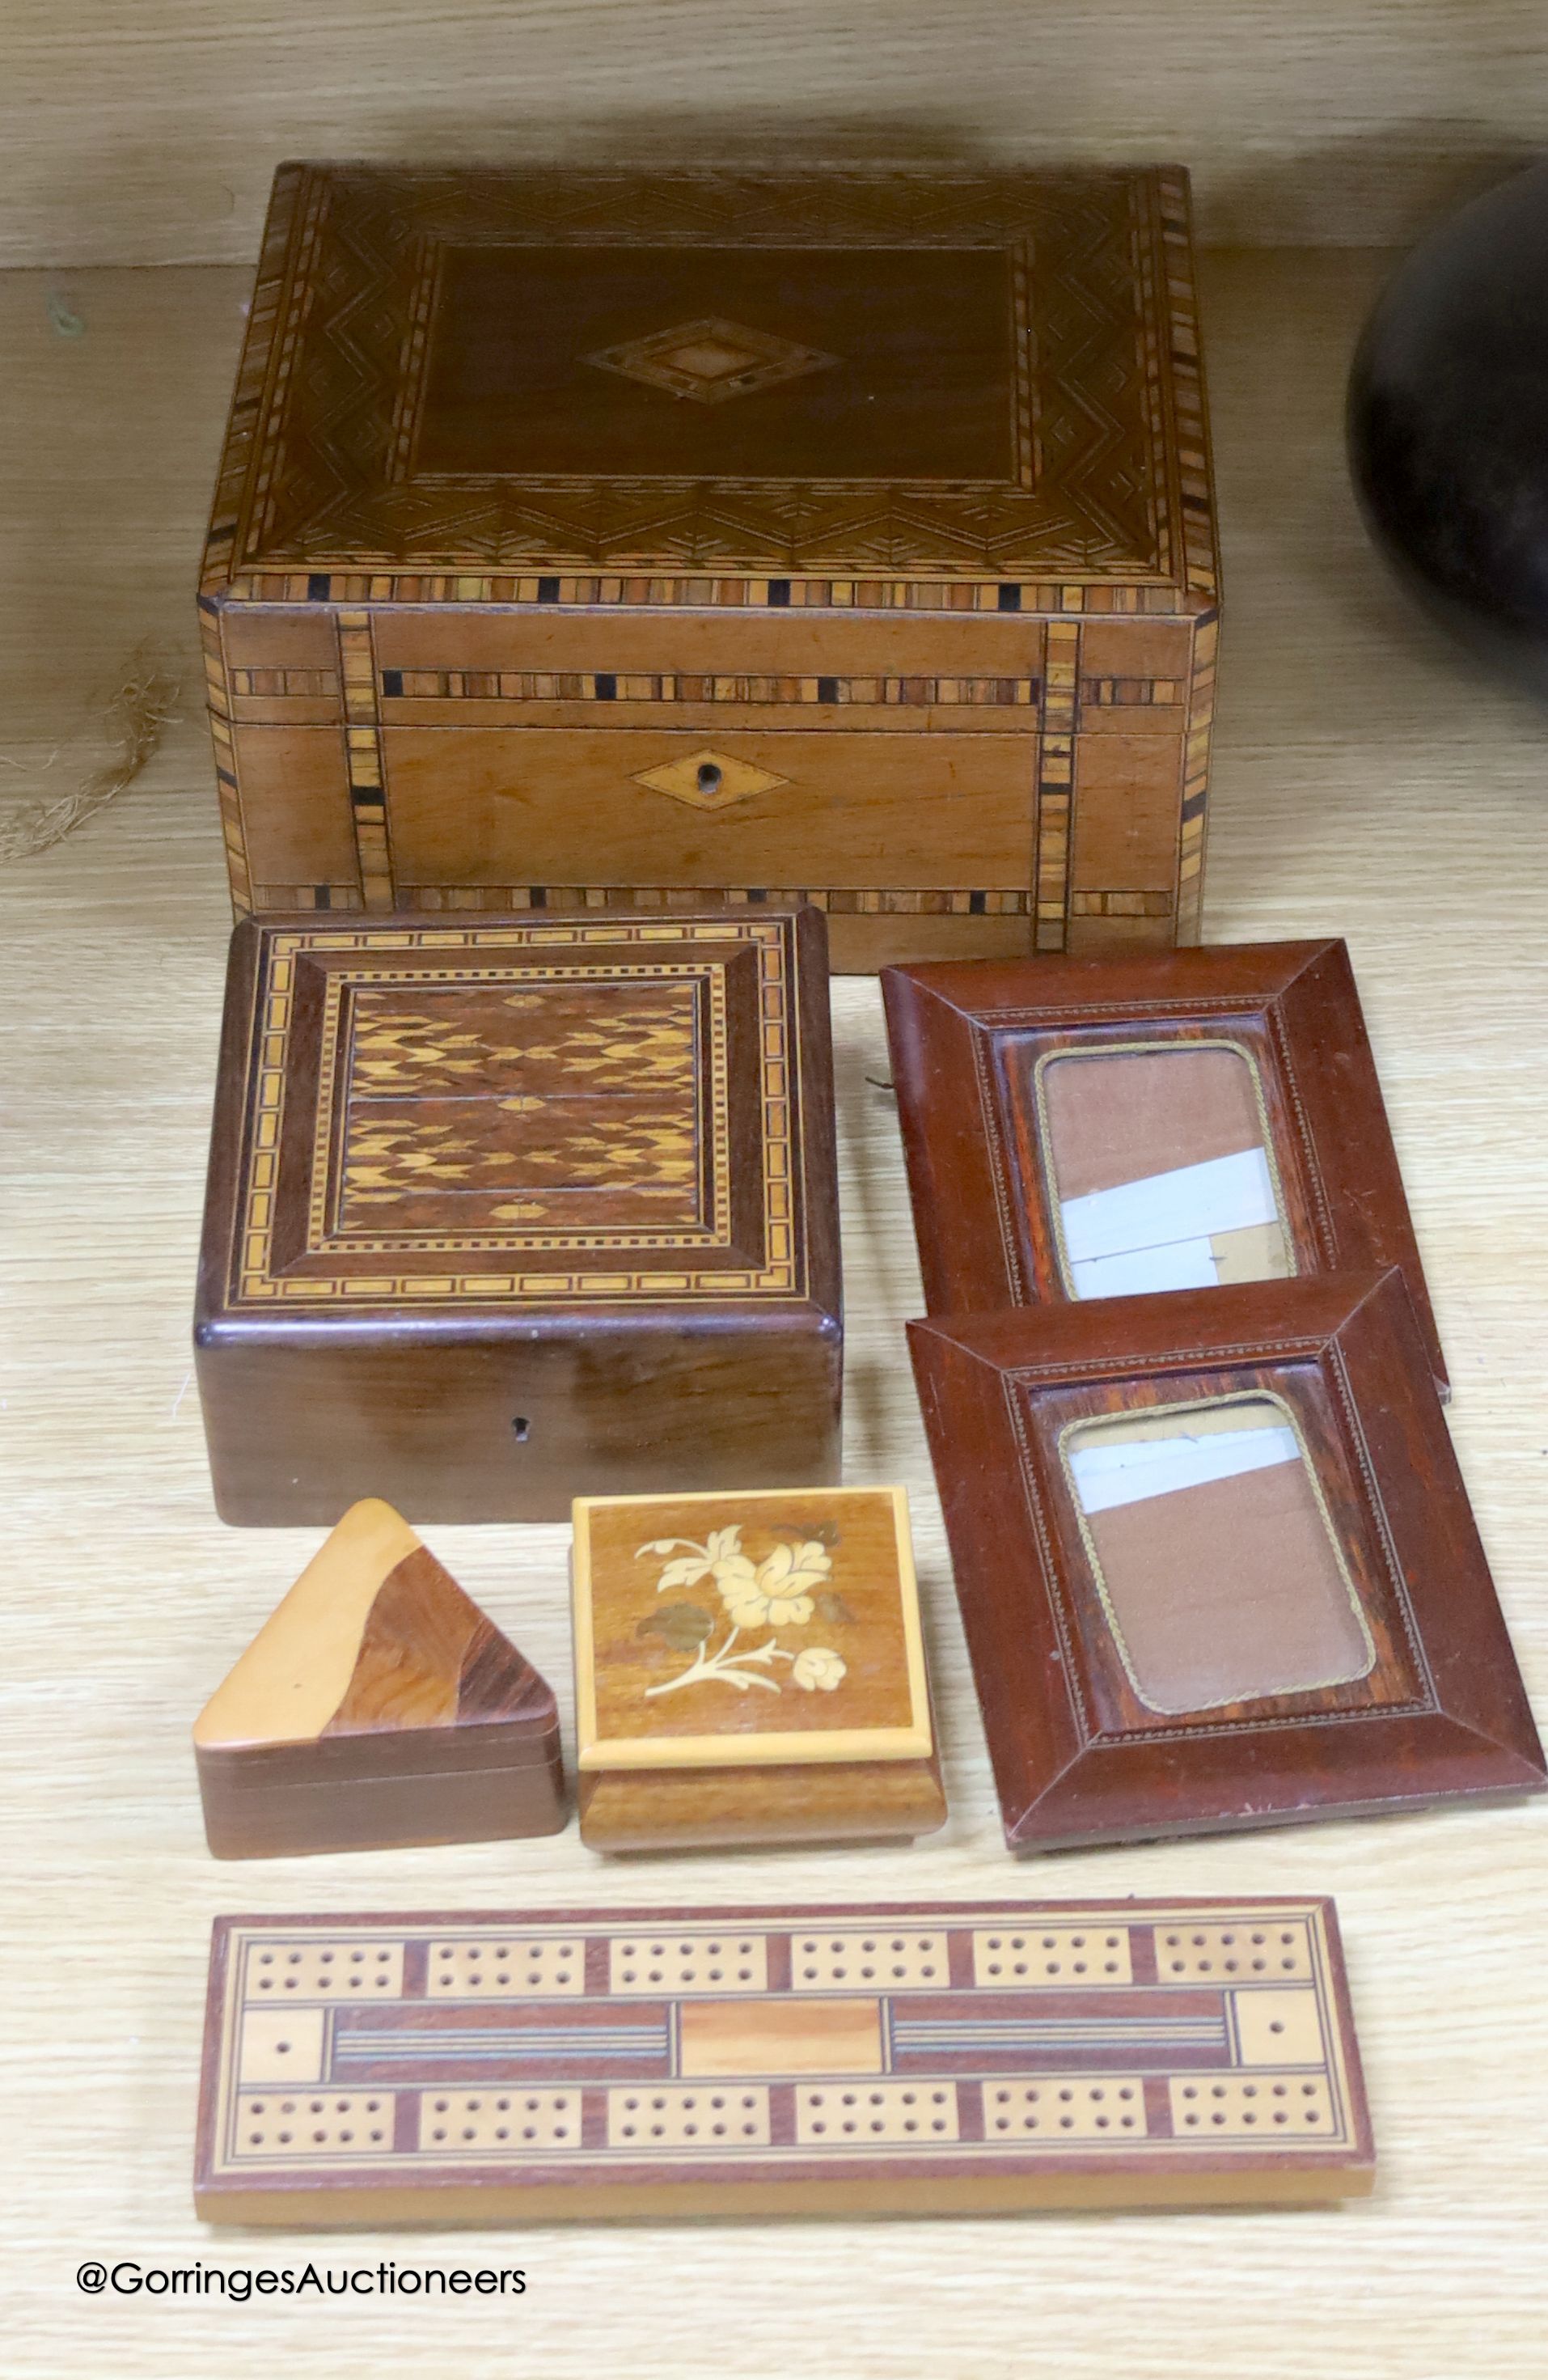 An inlaid writing slope, photo frames, boxes etc